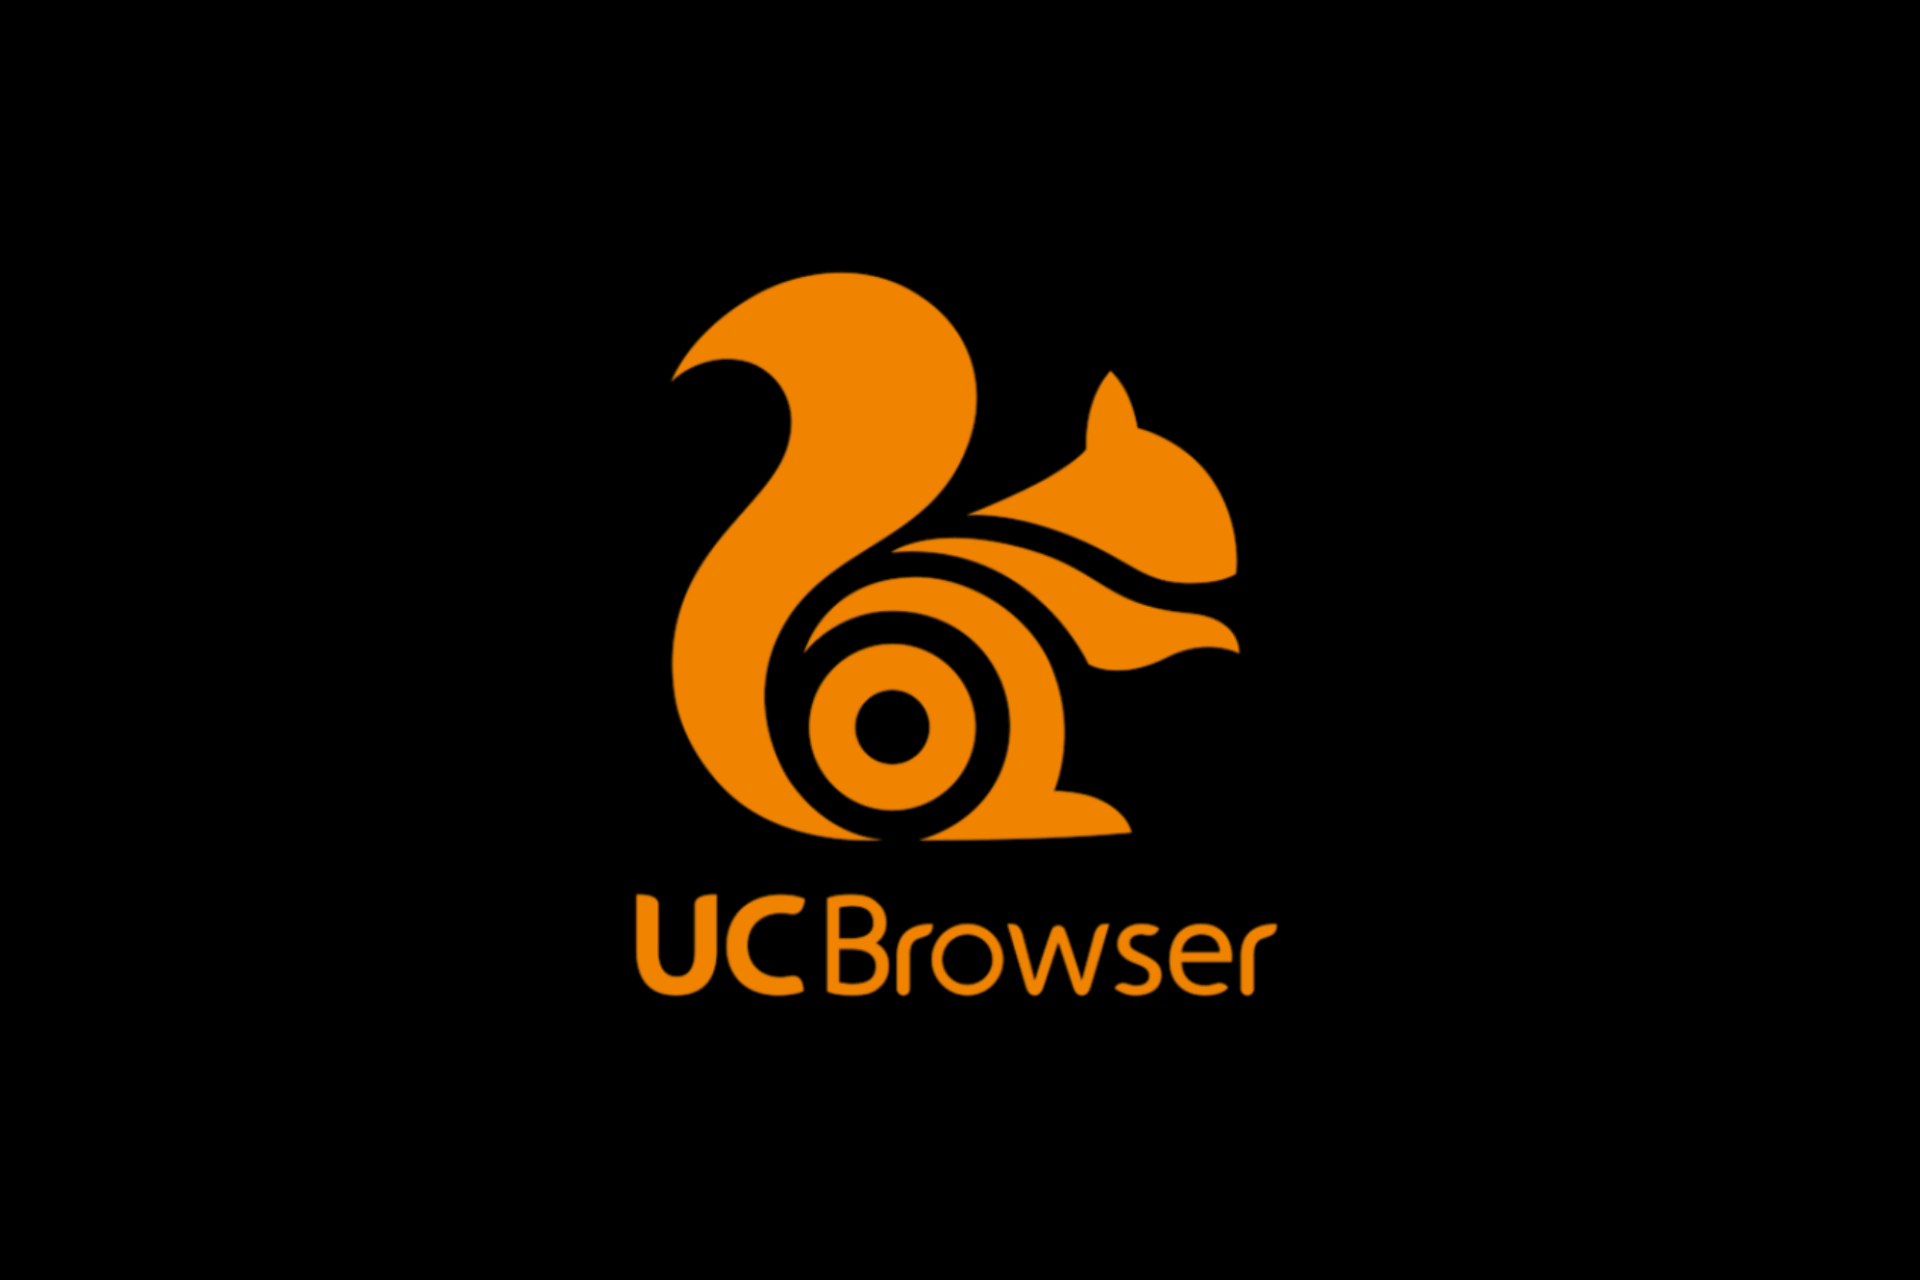 uc browser fast download speed